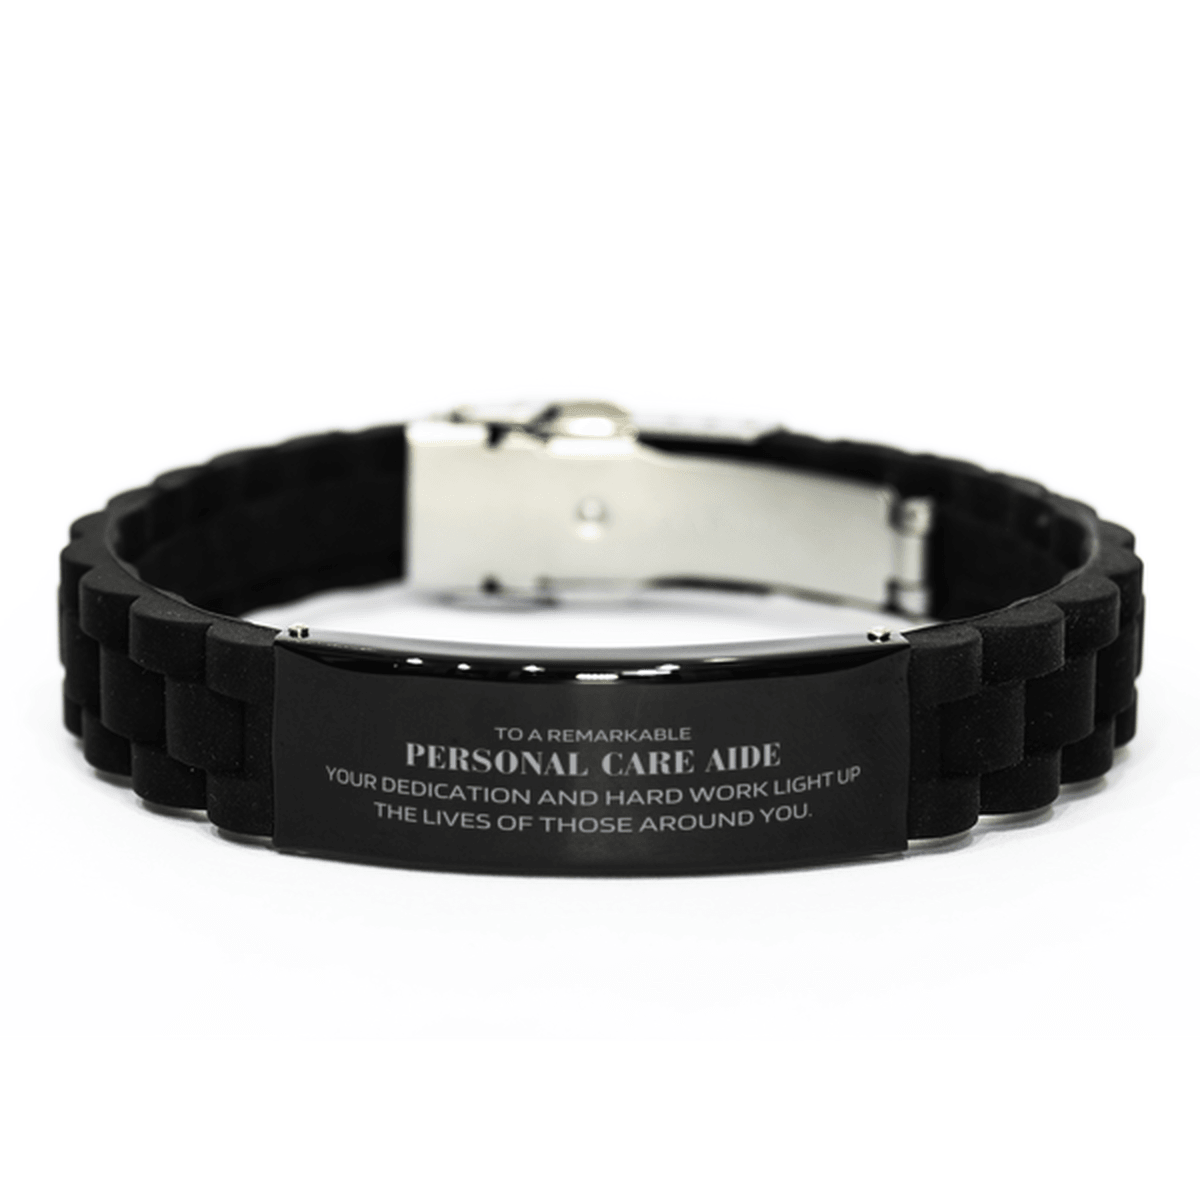 Remarkable Personal Care Aide Gifts, Your dedication and hard work, Inspirational Birthday Christmas Unique Black Glidelock Clasp Bracelet For Personal Care Aide, Coworkers, Men, Women, Friends - Mallard Moon Gift Shop